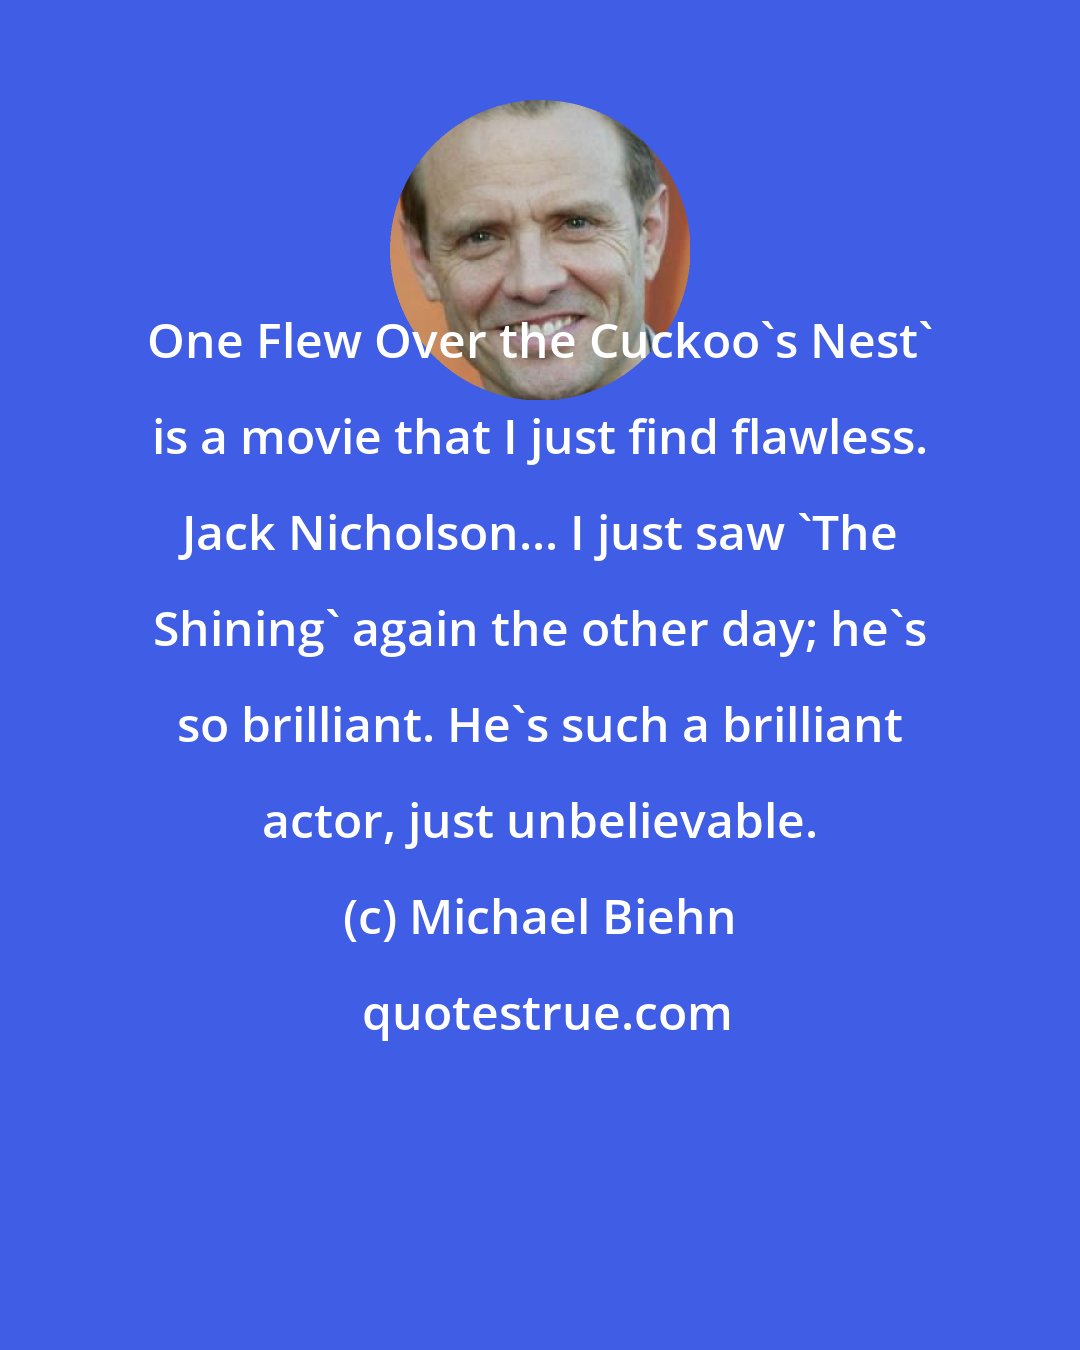 Michael Biehn: One Flew Over the Cuckoo's Nest' is a movie that I just find flawless. Jack Nicholson... I just saw 'The Shining' again the other day; he's so brilliant. He's such a brilliant actor, just unbelievable.